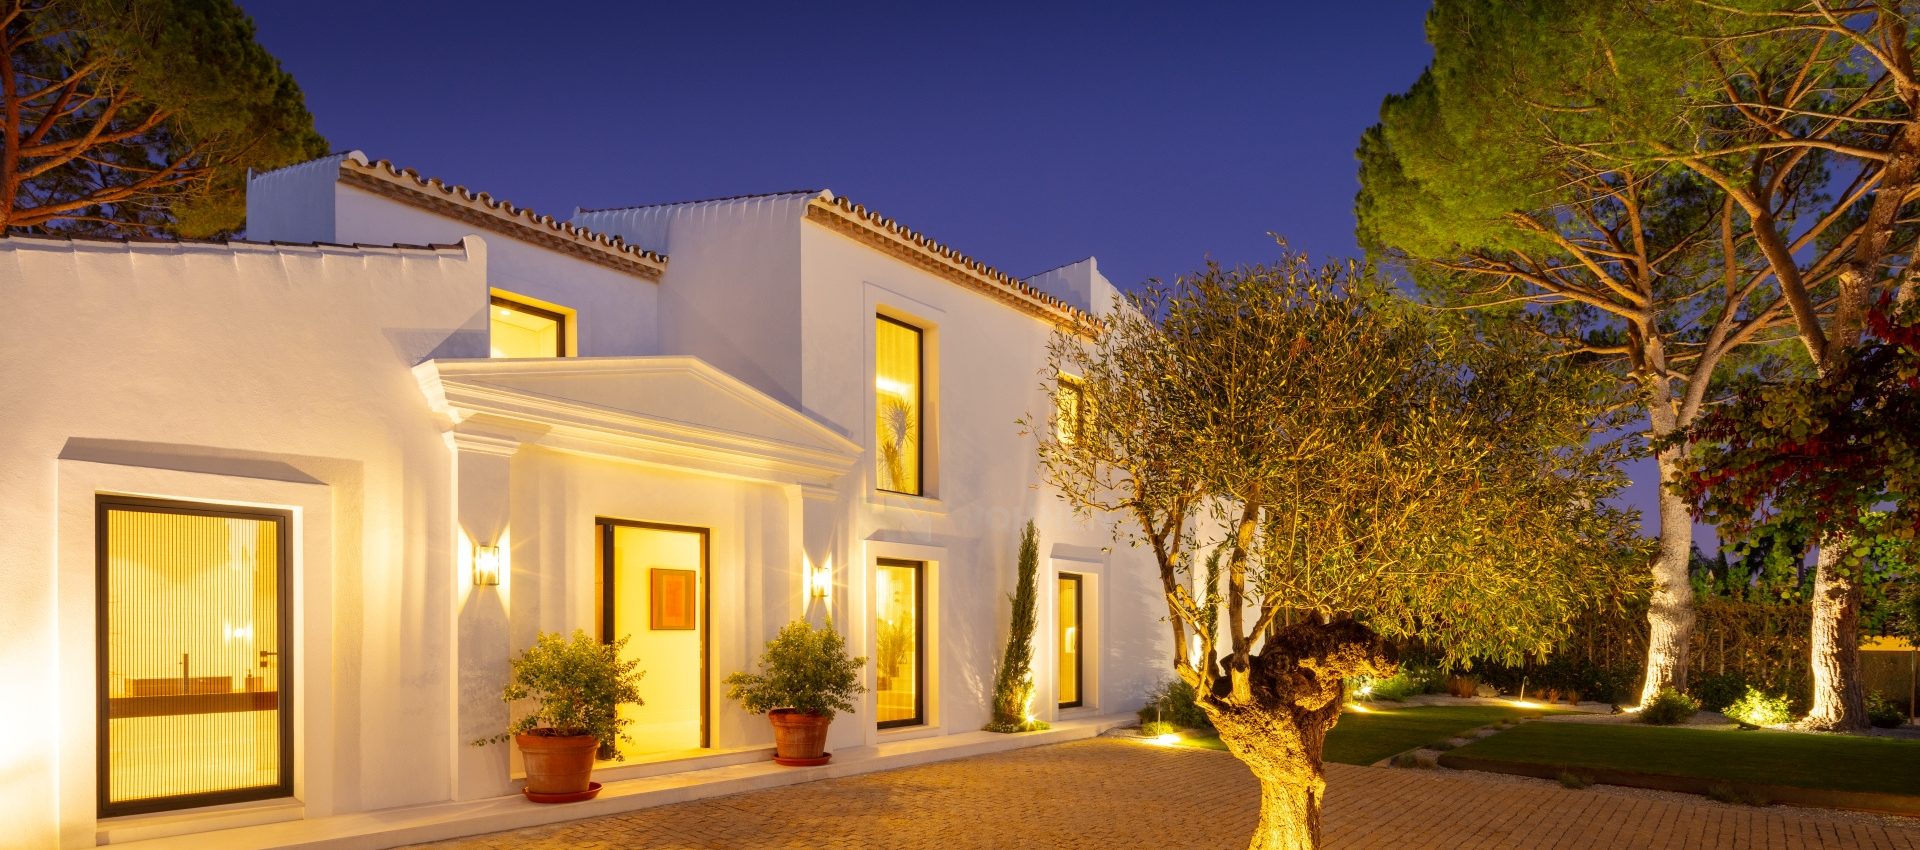 Exquisite family residence in the heart of the golf valley – Marbella